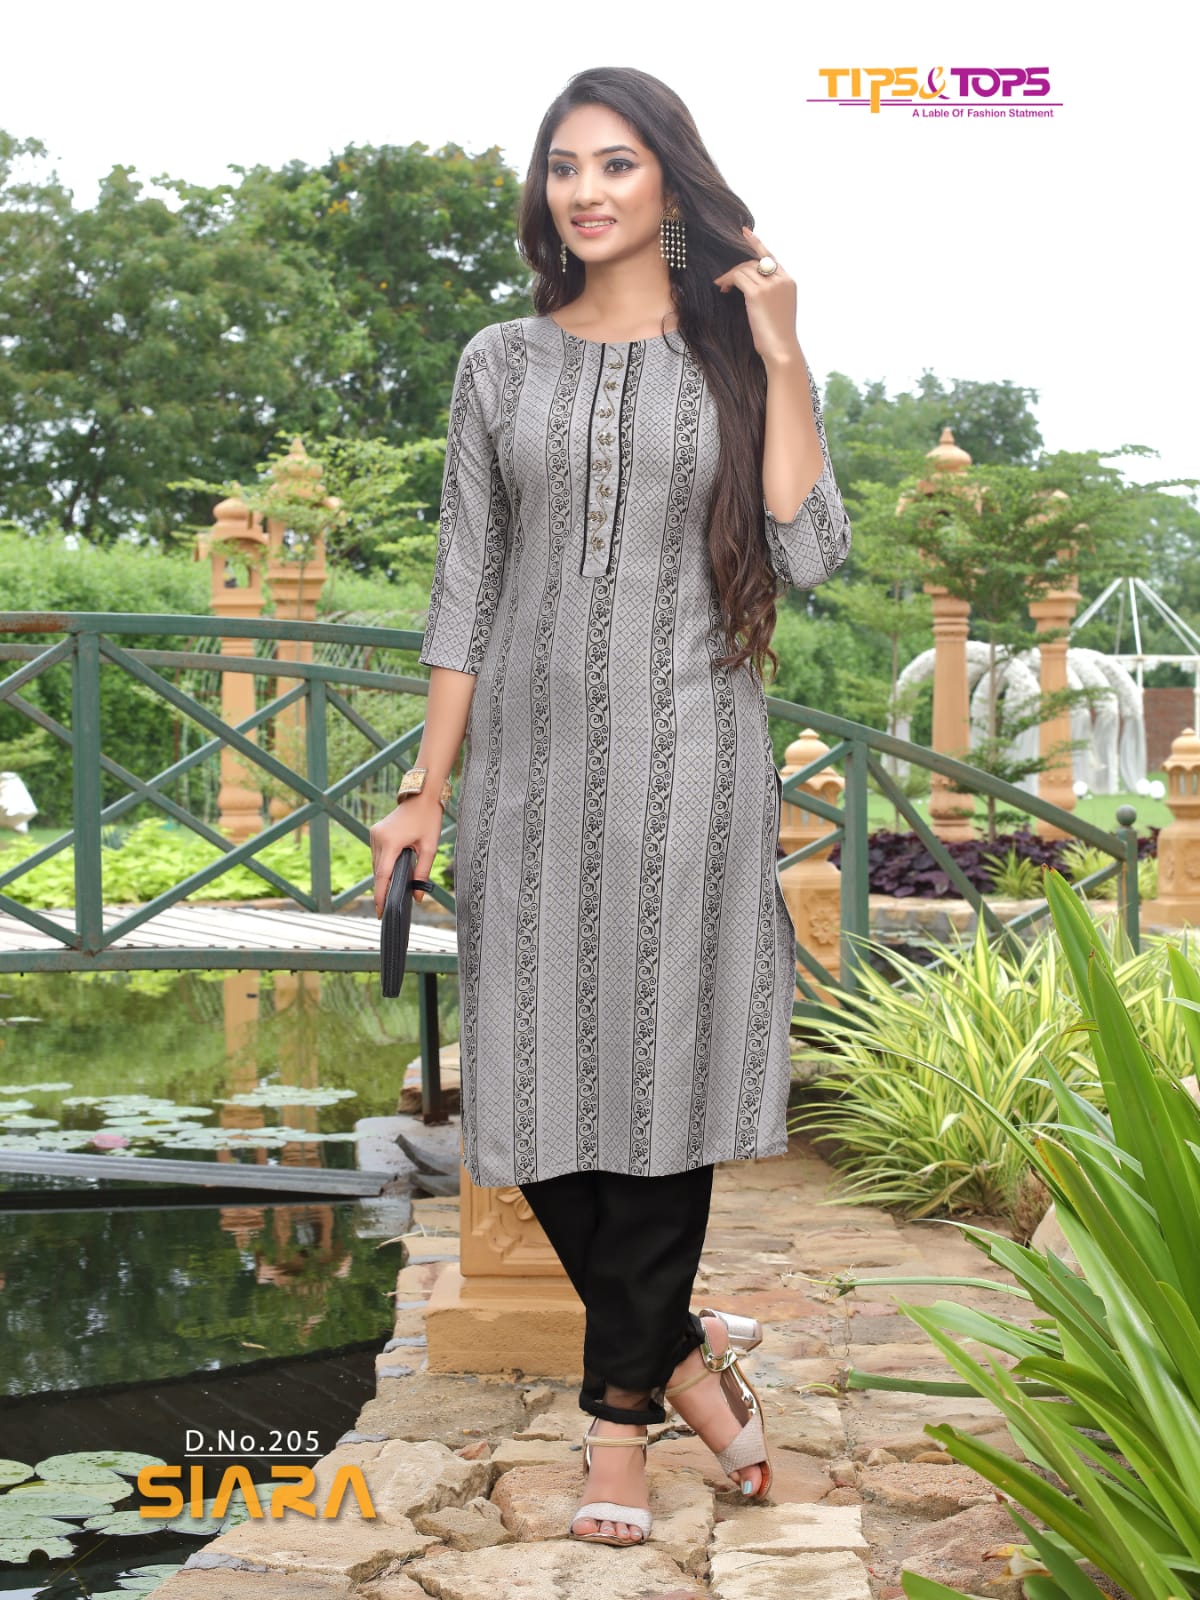 Punjabi kurti top only, Women's Fashion, Tops, Other Tops on Carousell